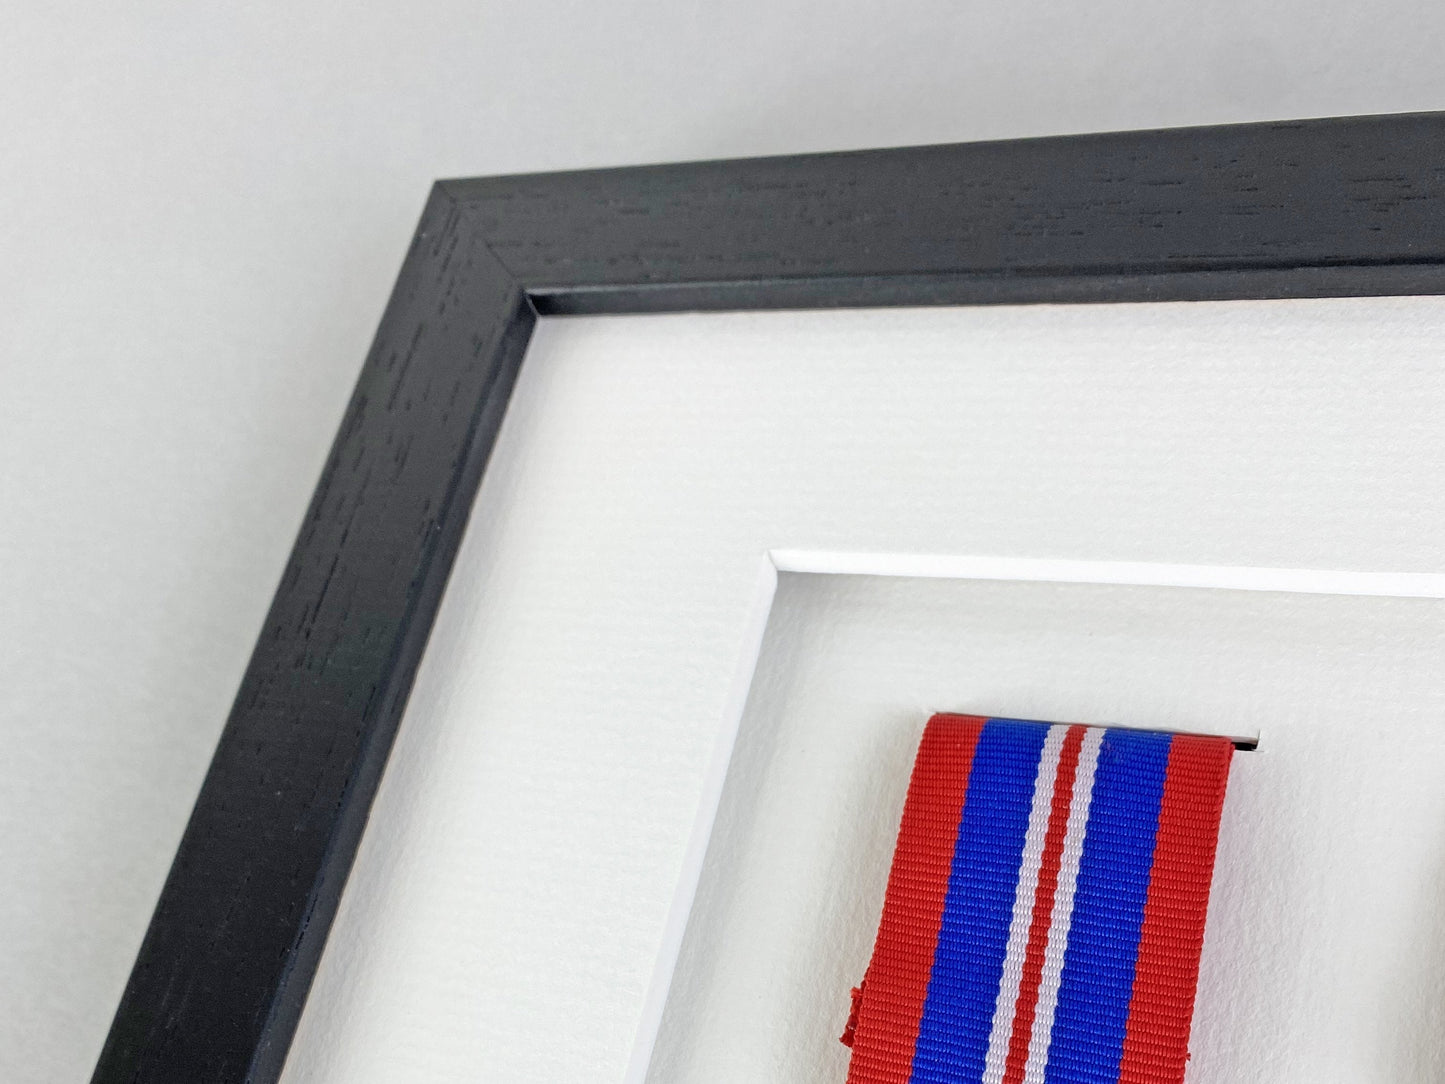 Military and Service Medal display Frame for Seven Medals and two 6x4" Photographs. 20x70cm. Handmade by Art@Home. War Medals.